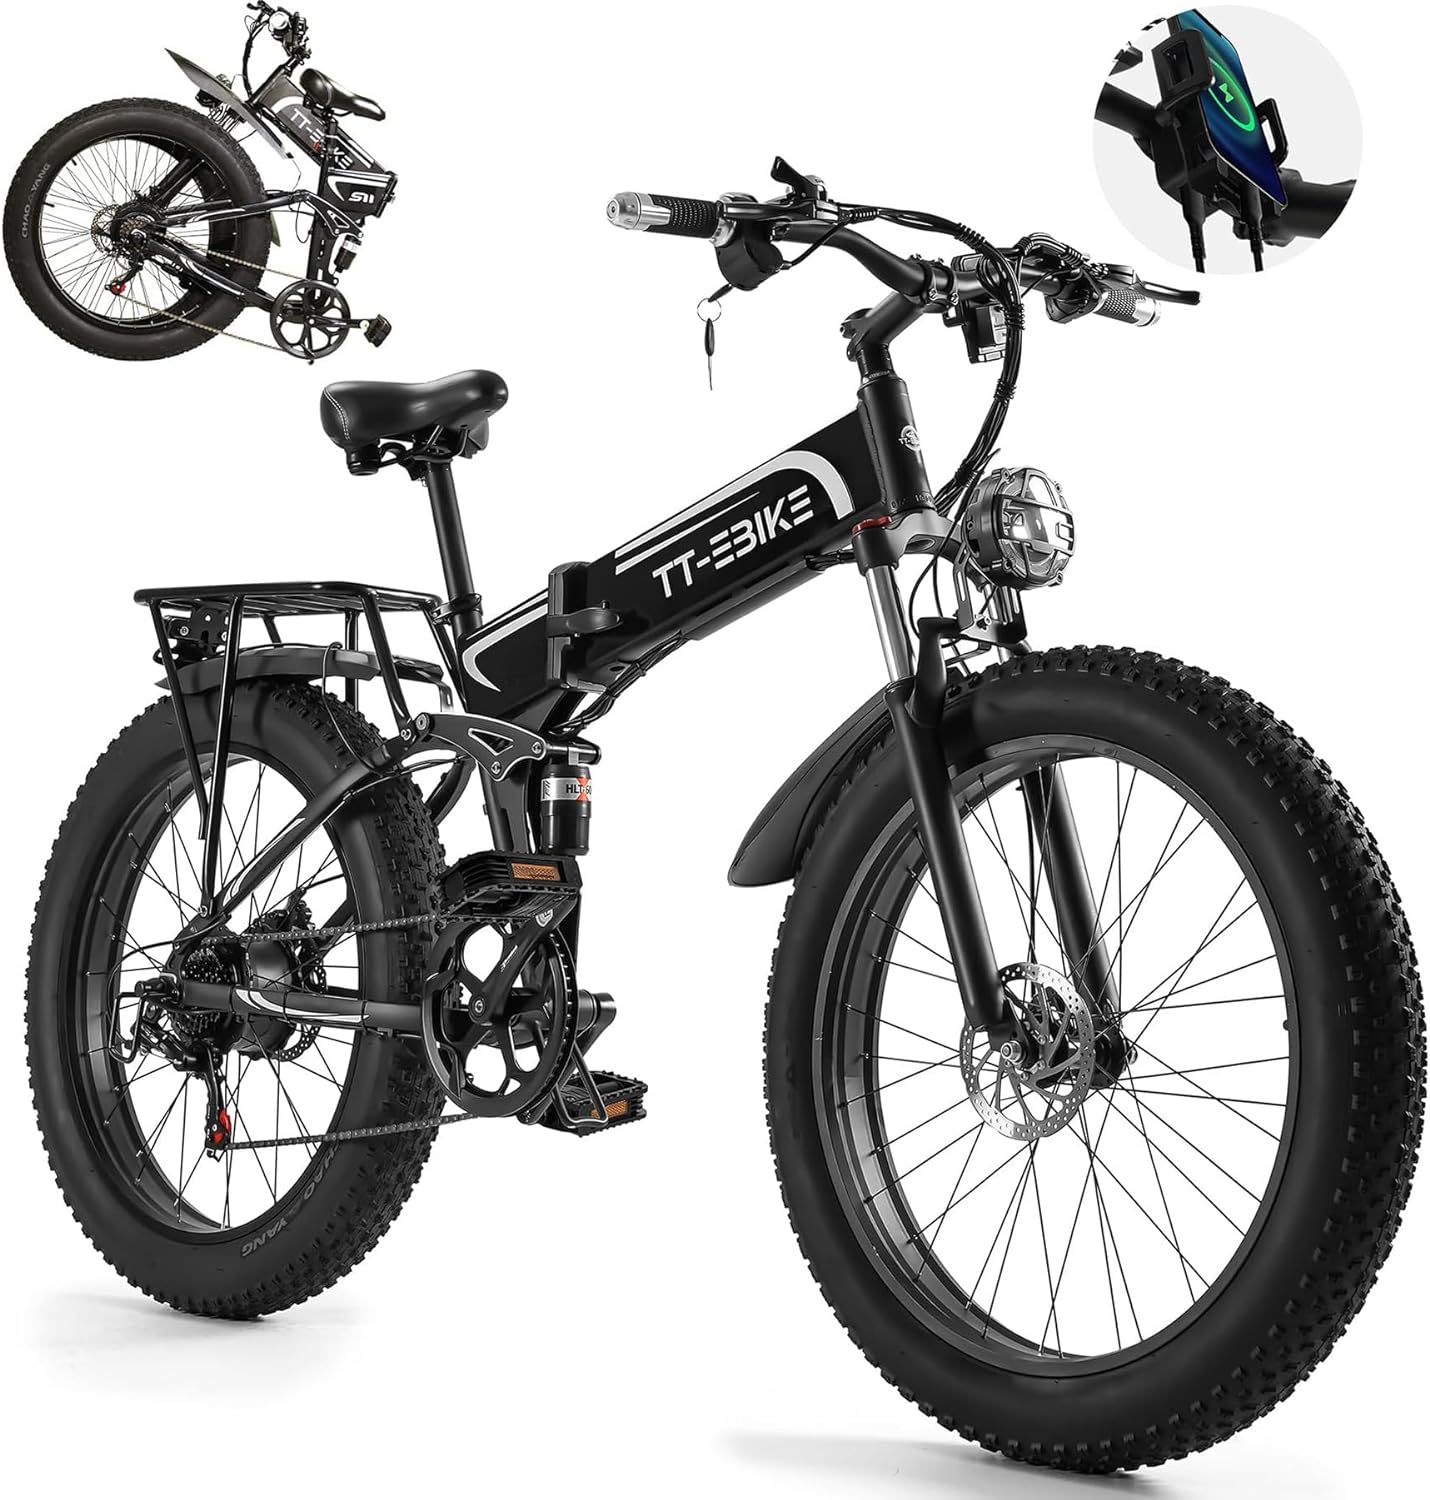 Best Electric Bike: Top 5 Picks for Your Ultimate Riding Experience